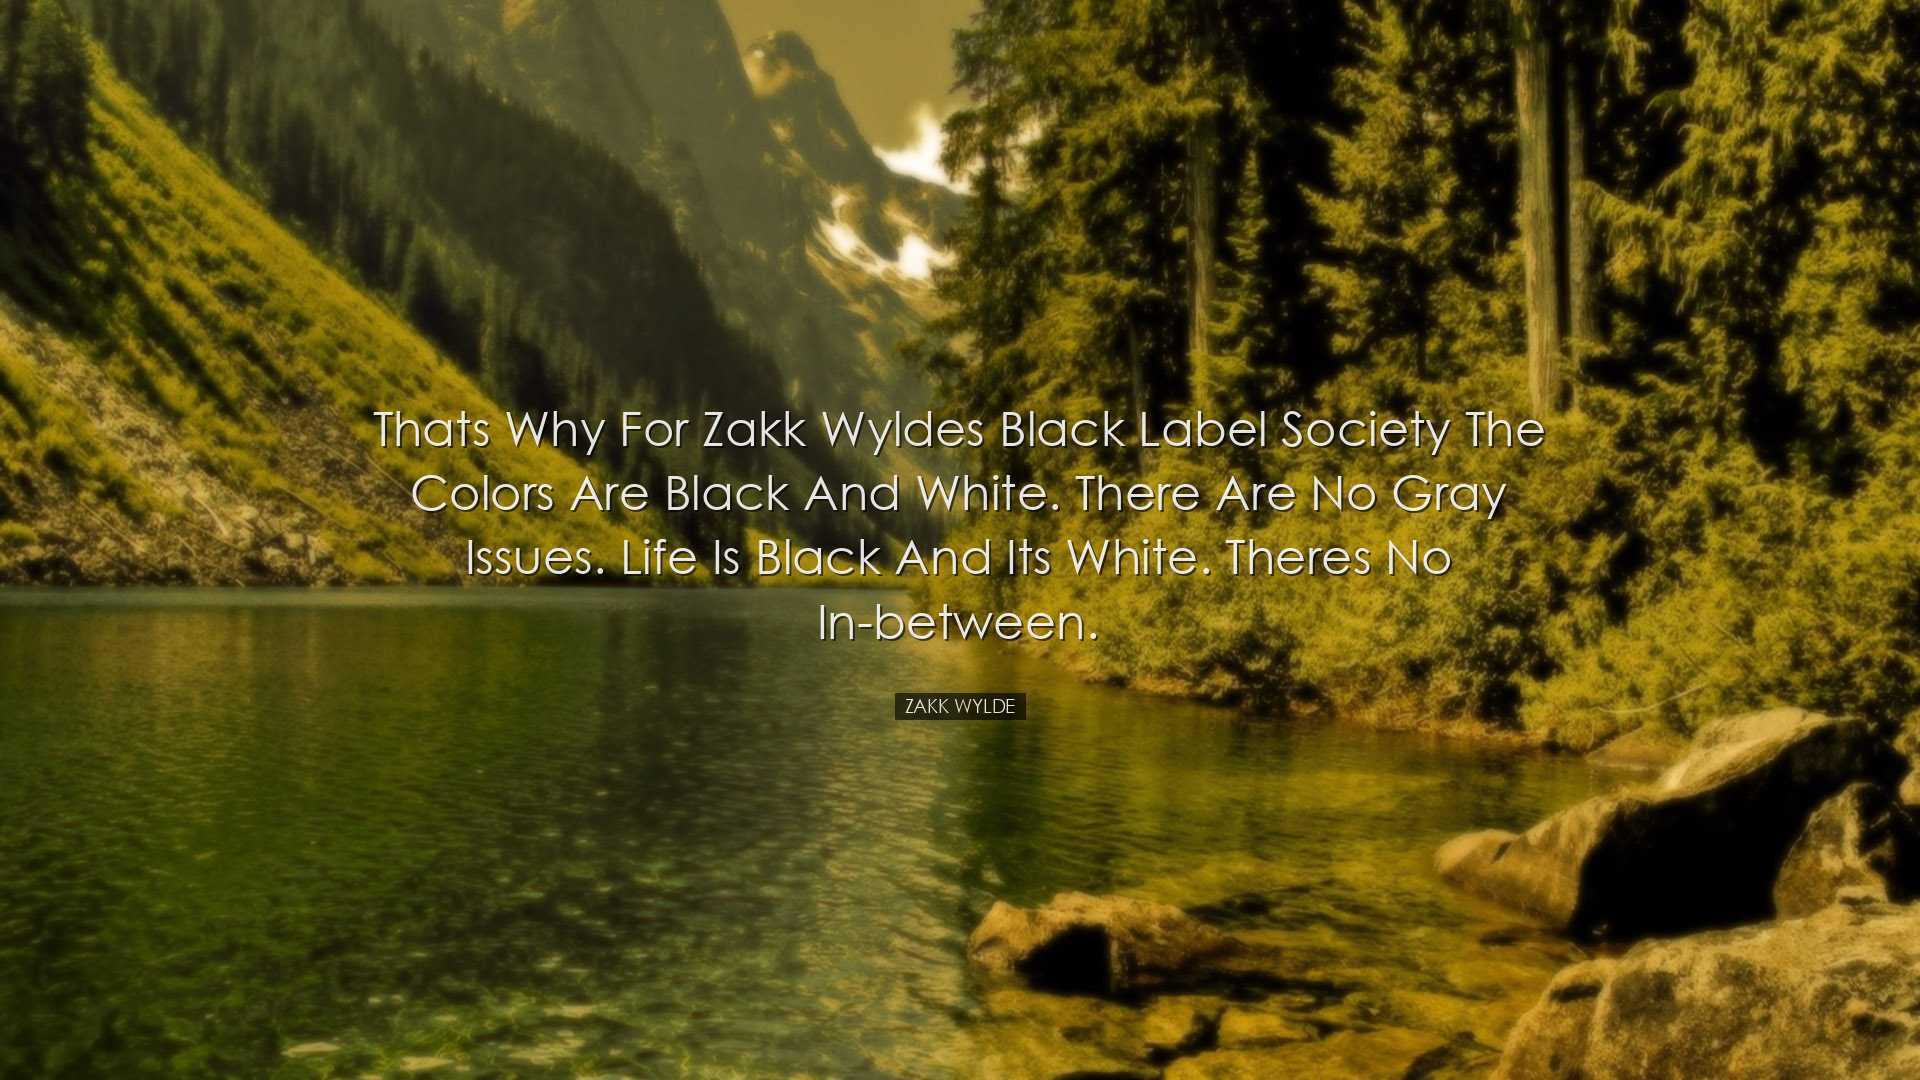 Thats why for Zakk Wyldes Black Label Society the colors are black